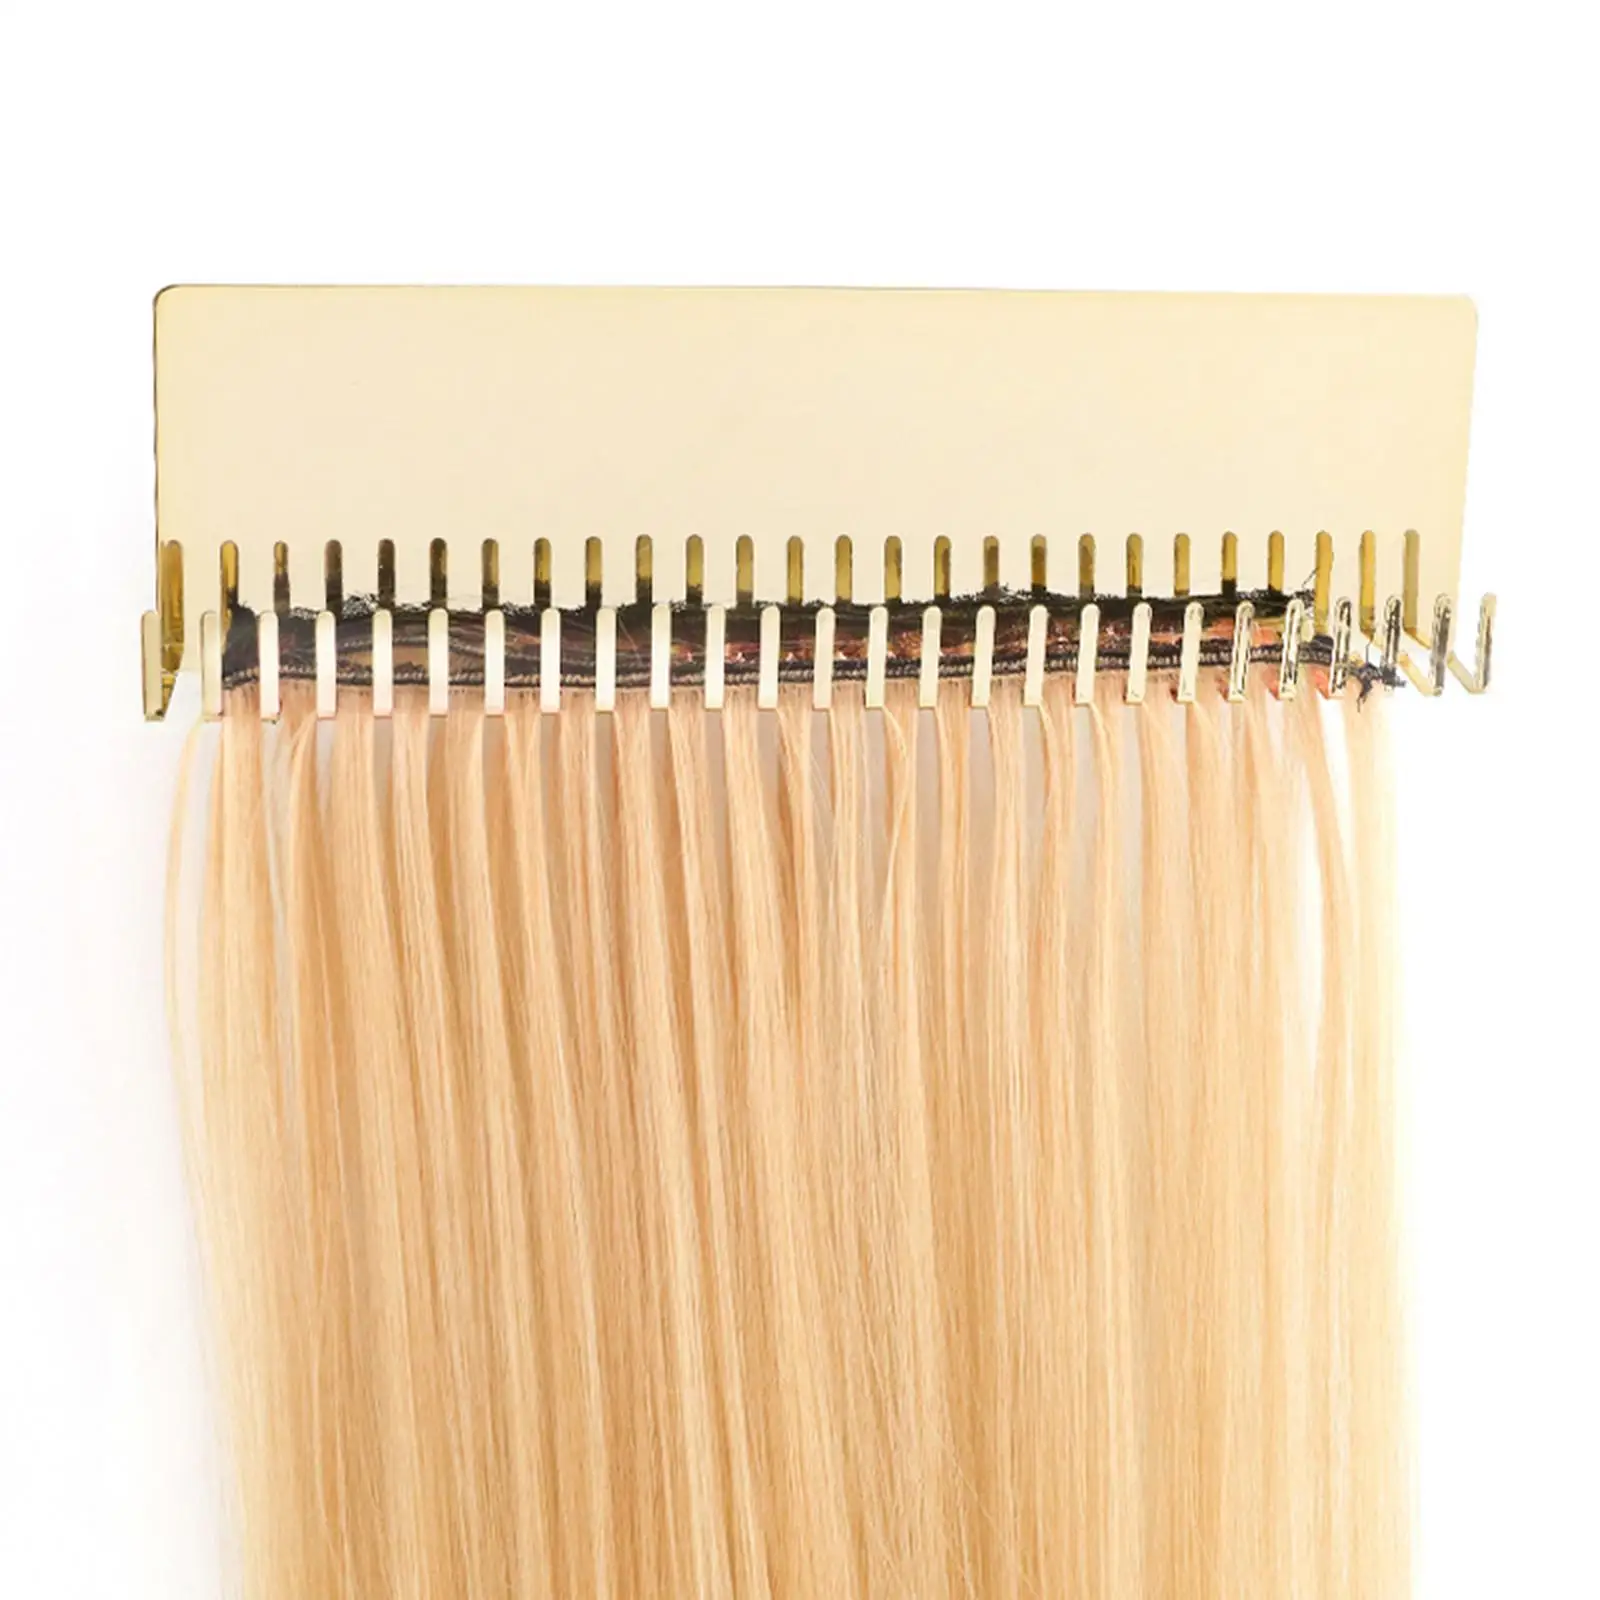 Stainless Steel hair extensions Holder Hair Strands Organizer for Sectioning Weaving